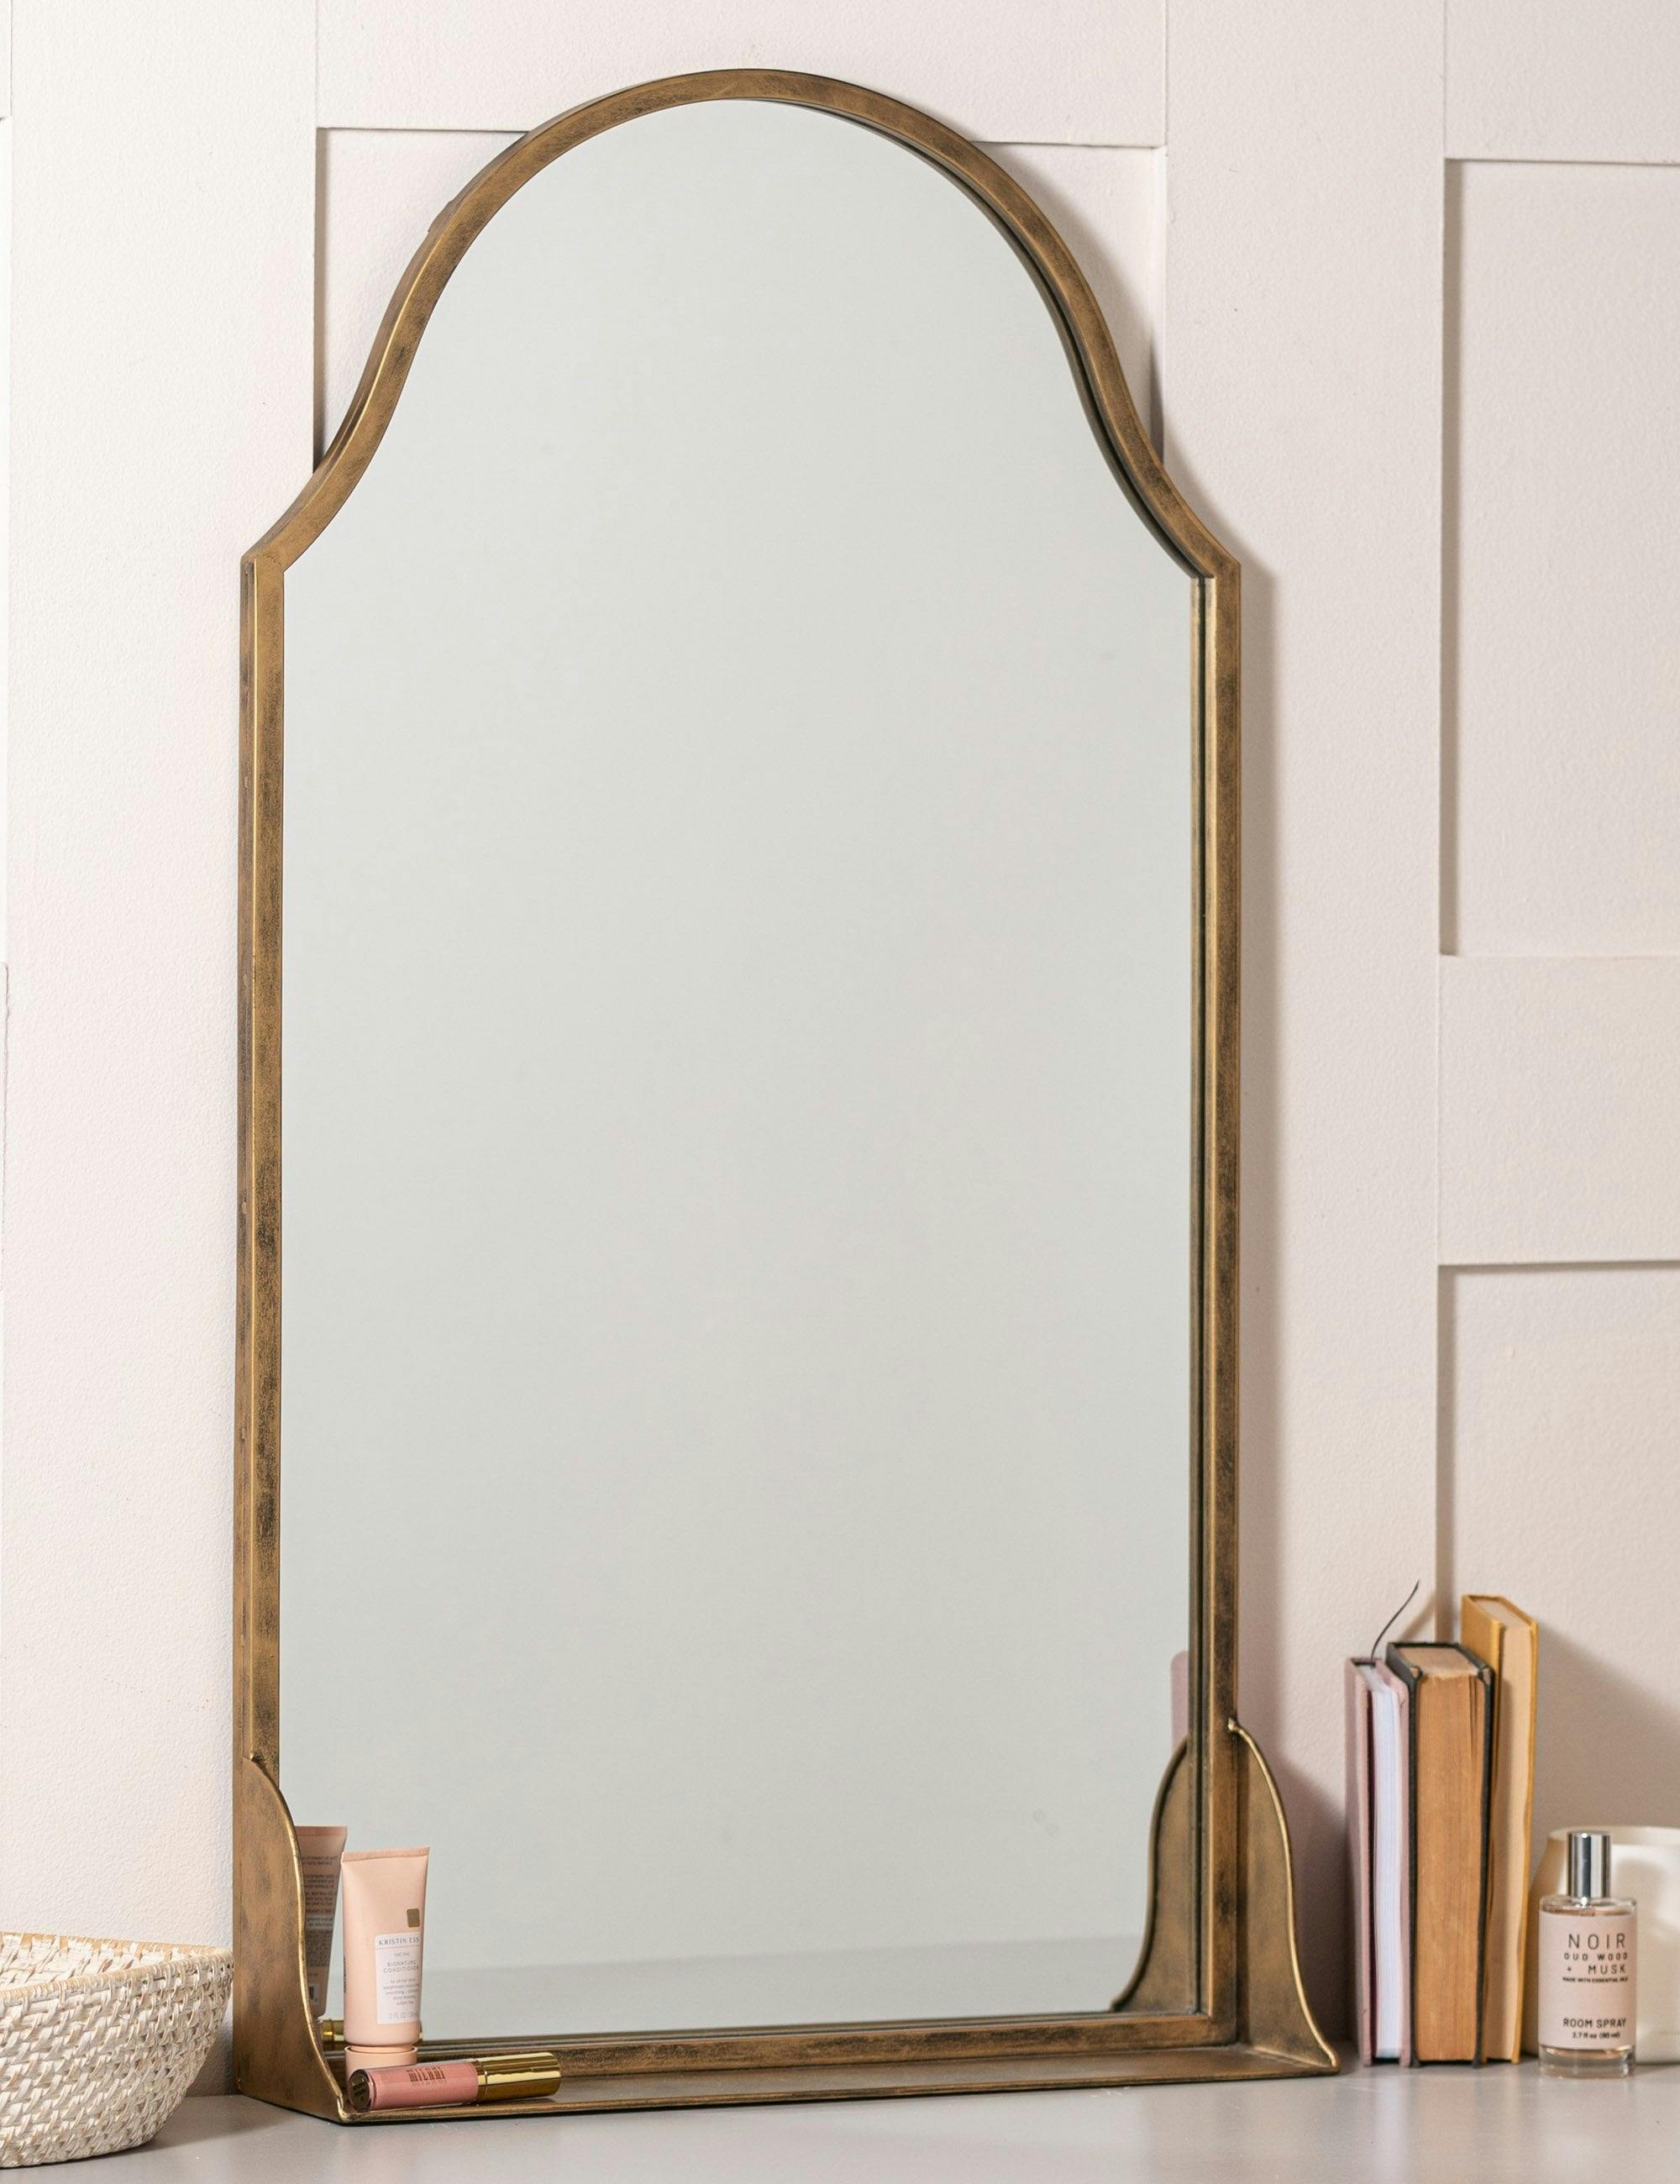 Arched Antique Bronze Wall Mirror with Built-In Wood Shelf